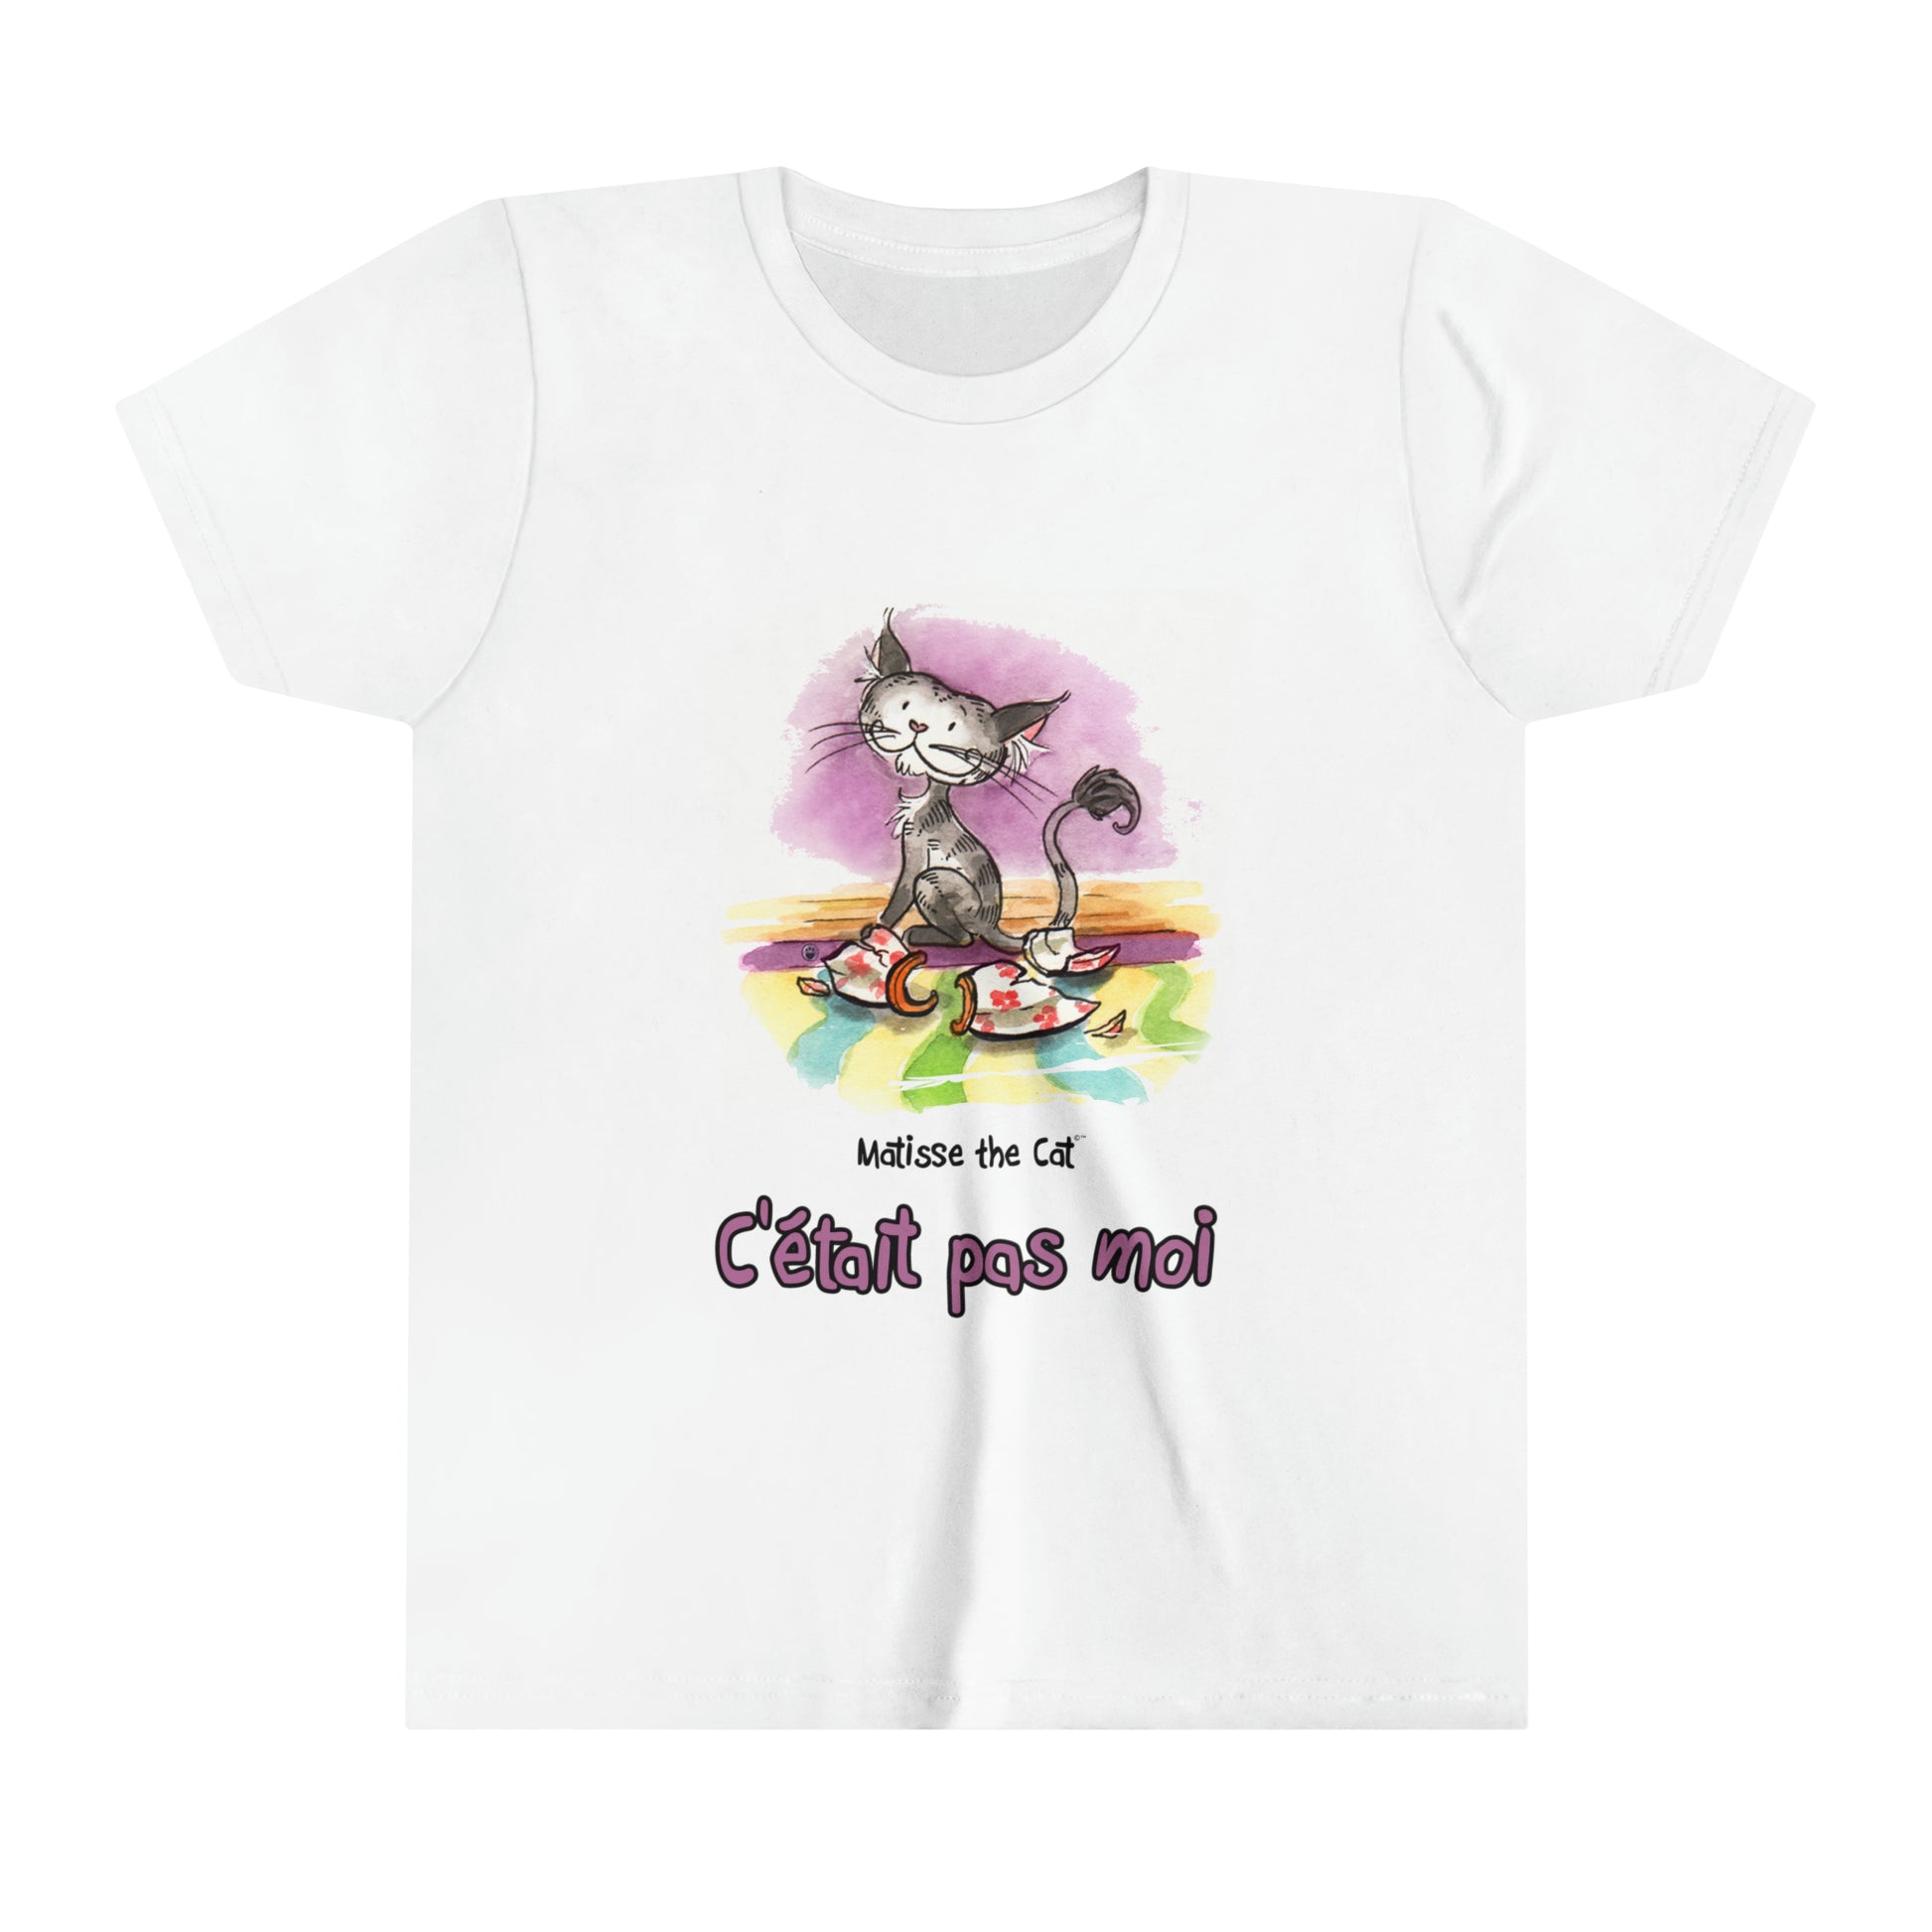 A white official, Matisse the Cat children’s t-shirt with the slogan “c'était pas moi” (It wasn’t me) featuring Matisse sitting on a vibrant carpet, his innocent gaze fixed upon a broken vase.